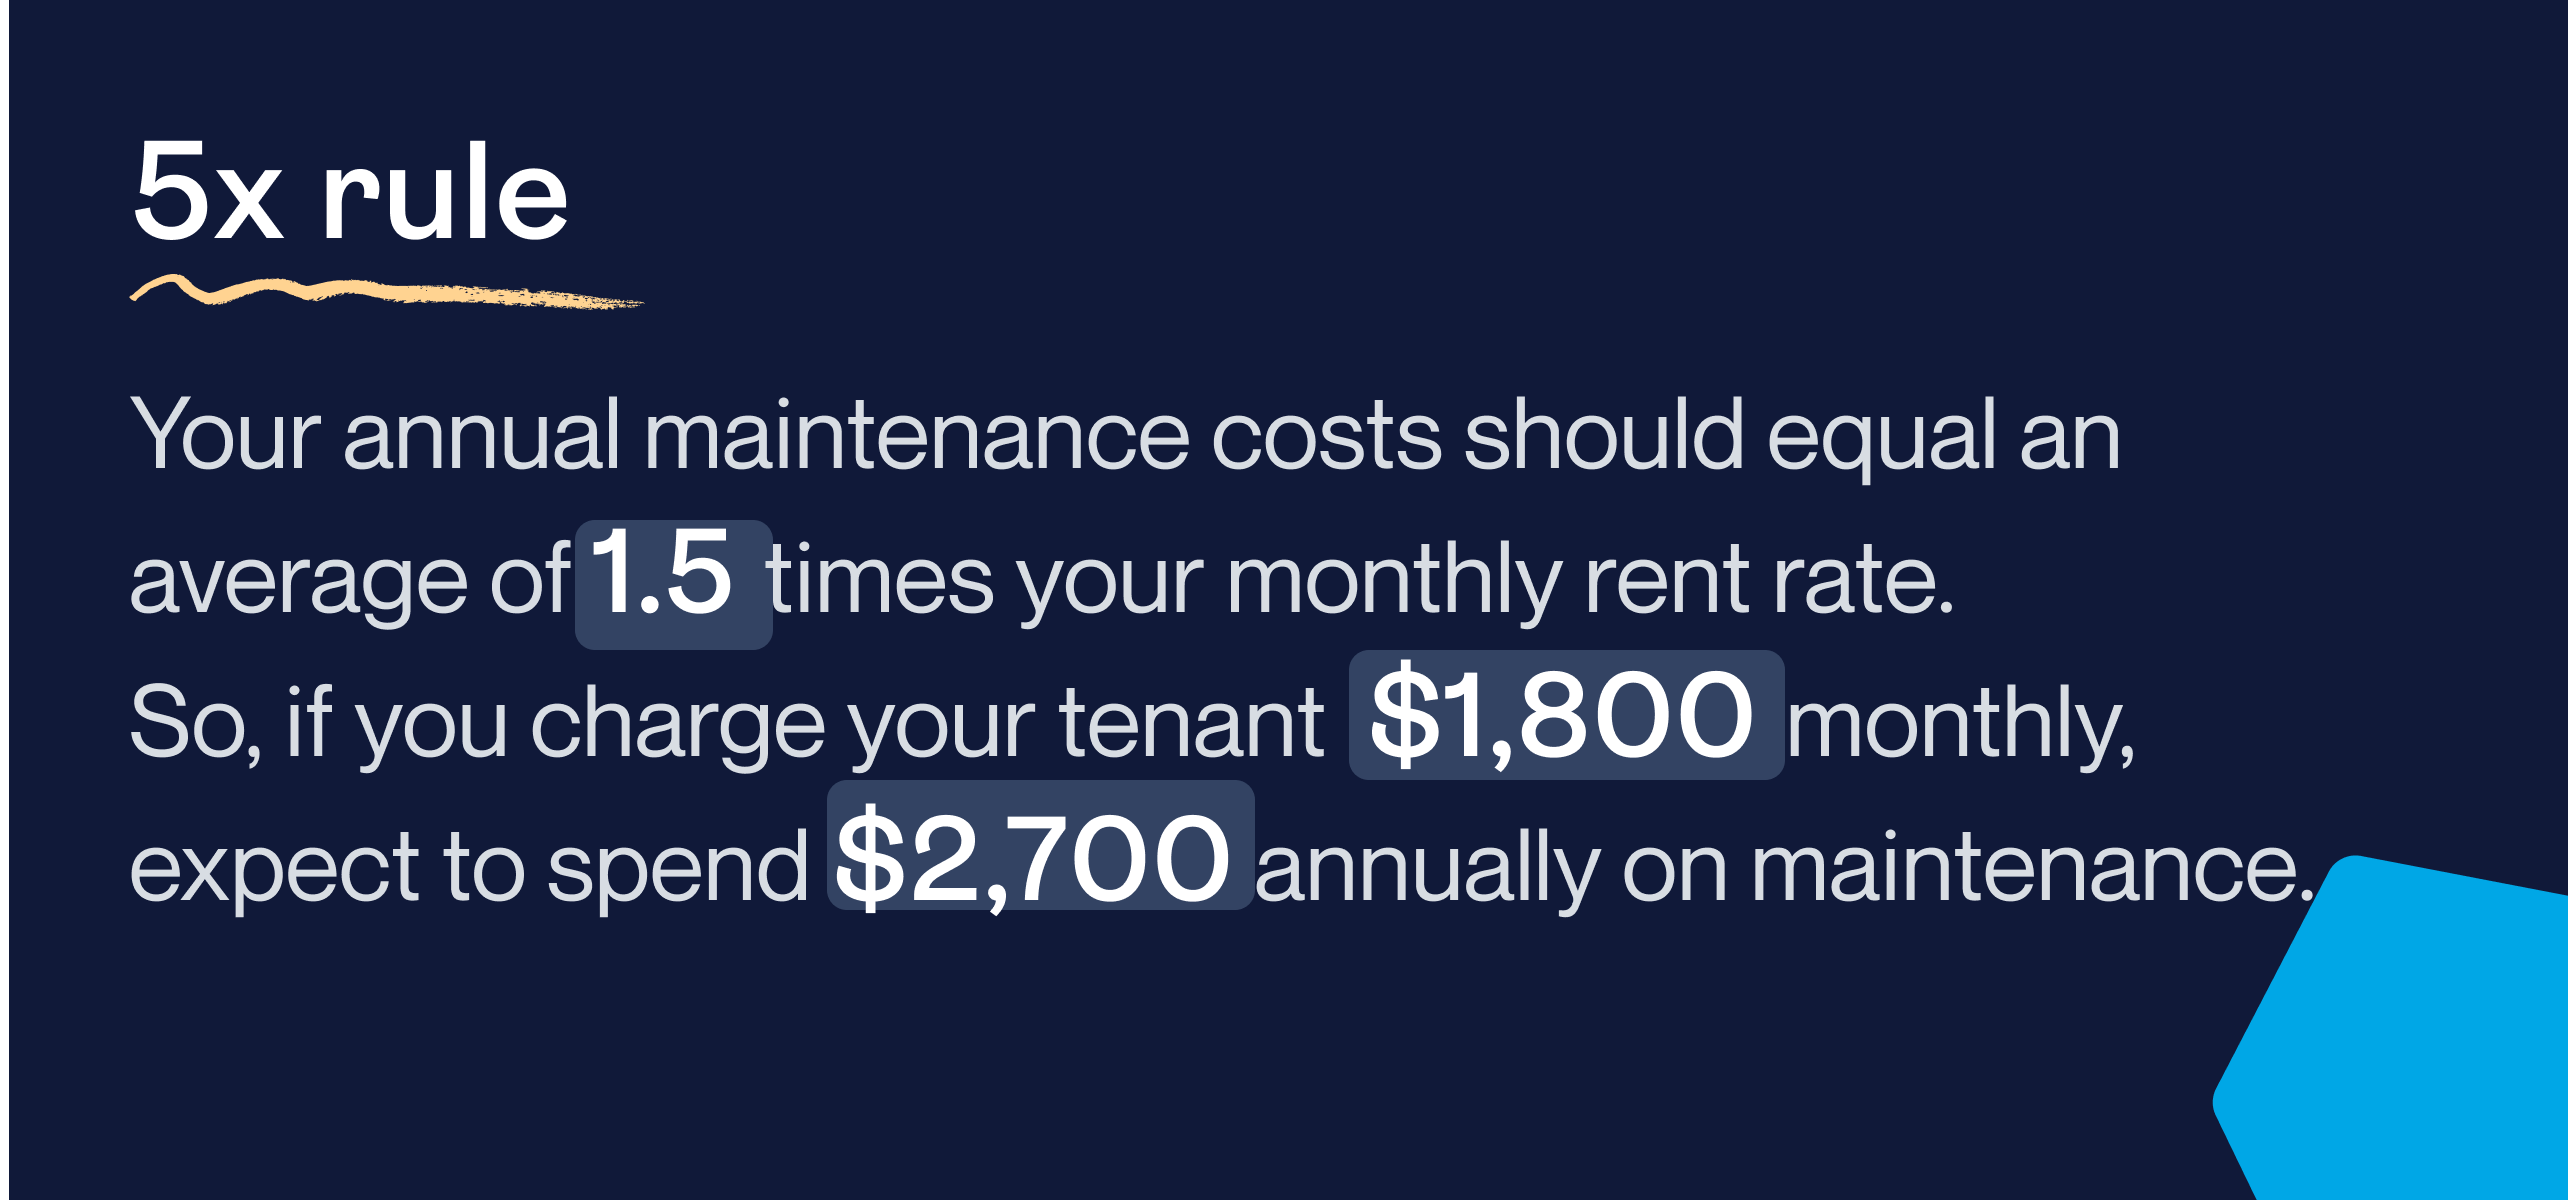 5x rule: Your annual maintenance costs should equal an average of 1.5 times your monthly rent rate. So, if you charge your tenant $1,800 monthly, expect to spend $2,700 annually on maintenance.